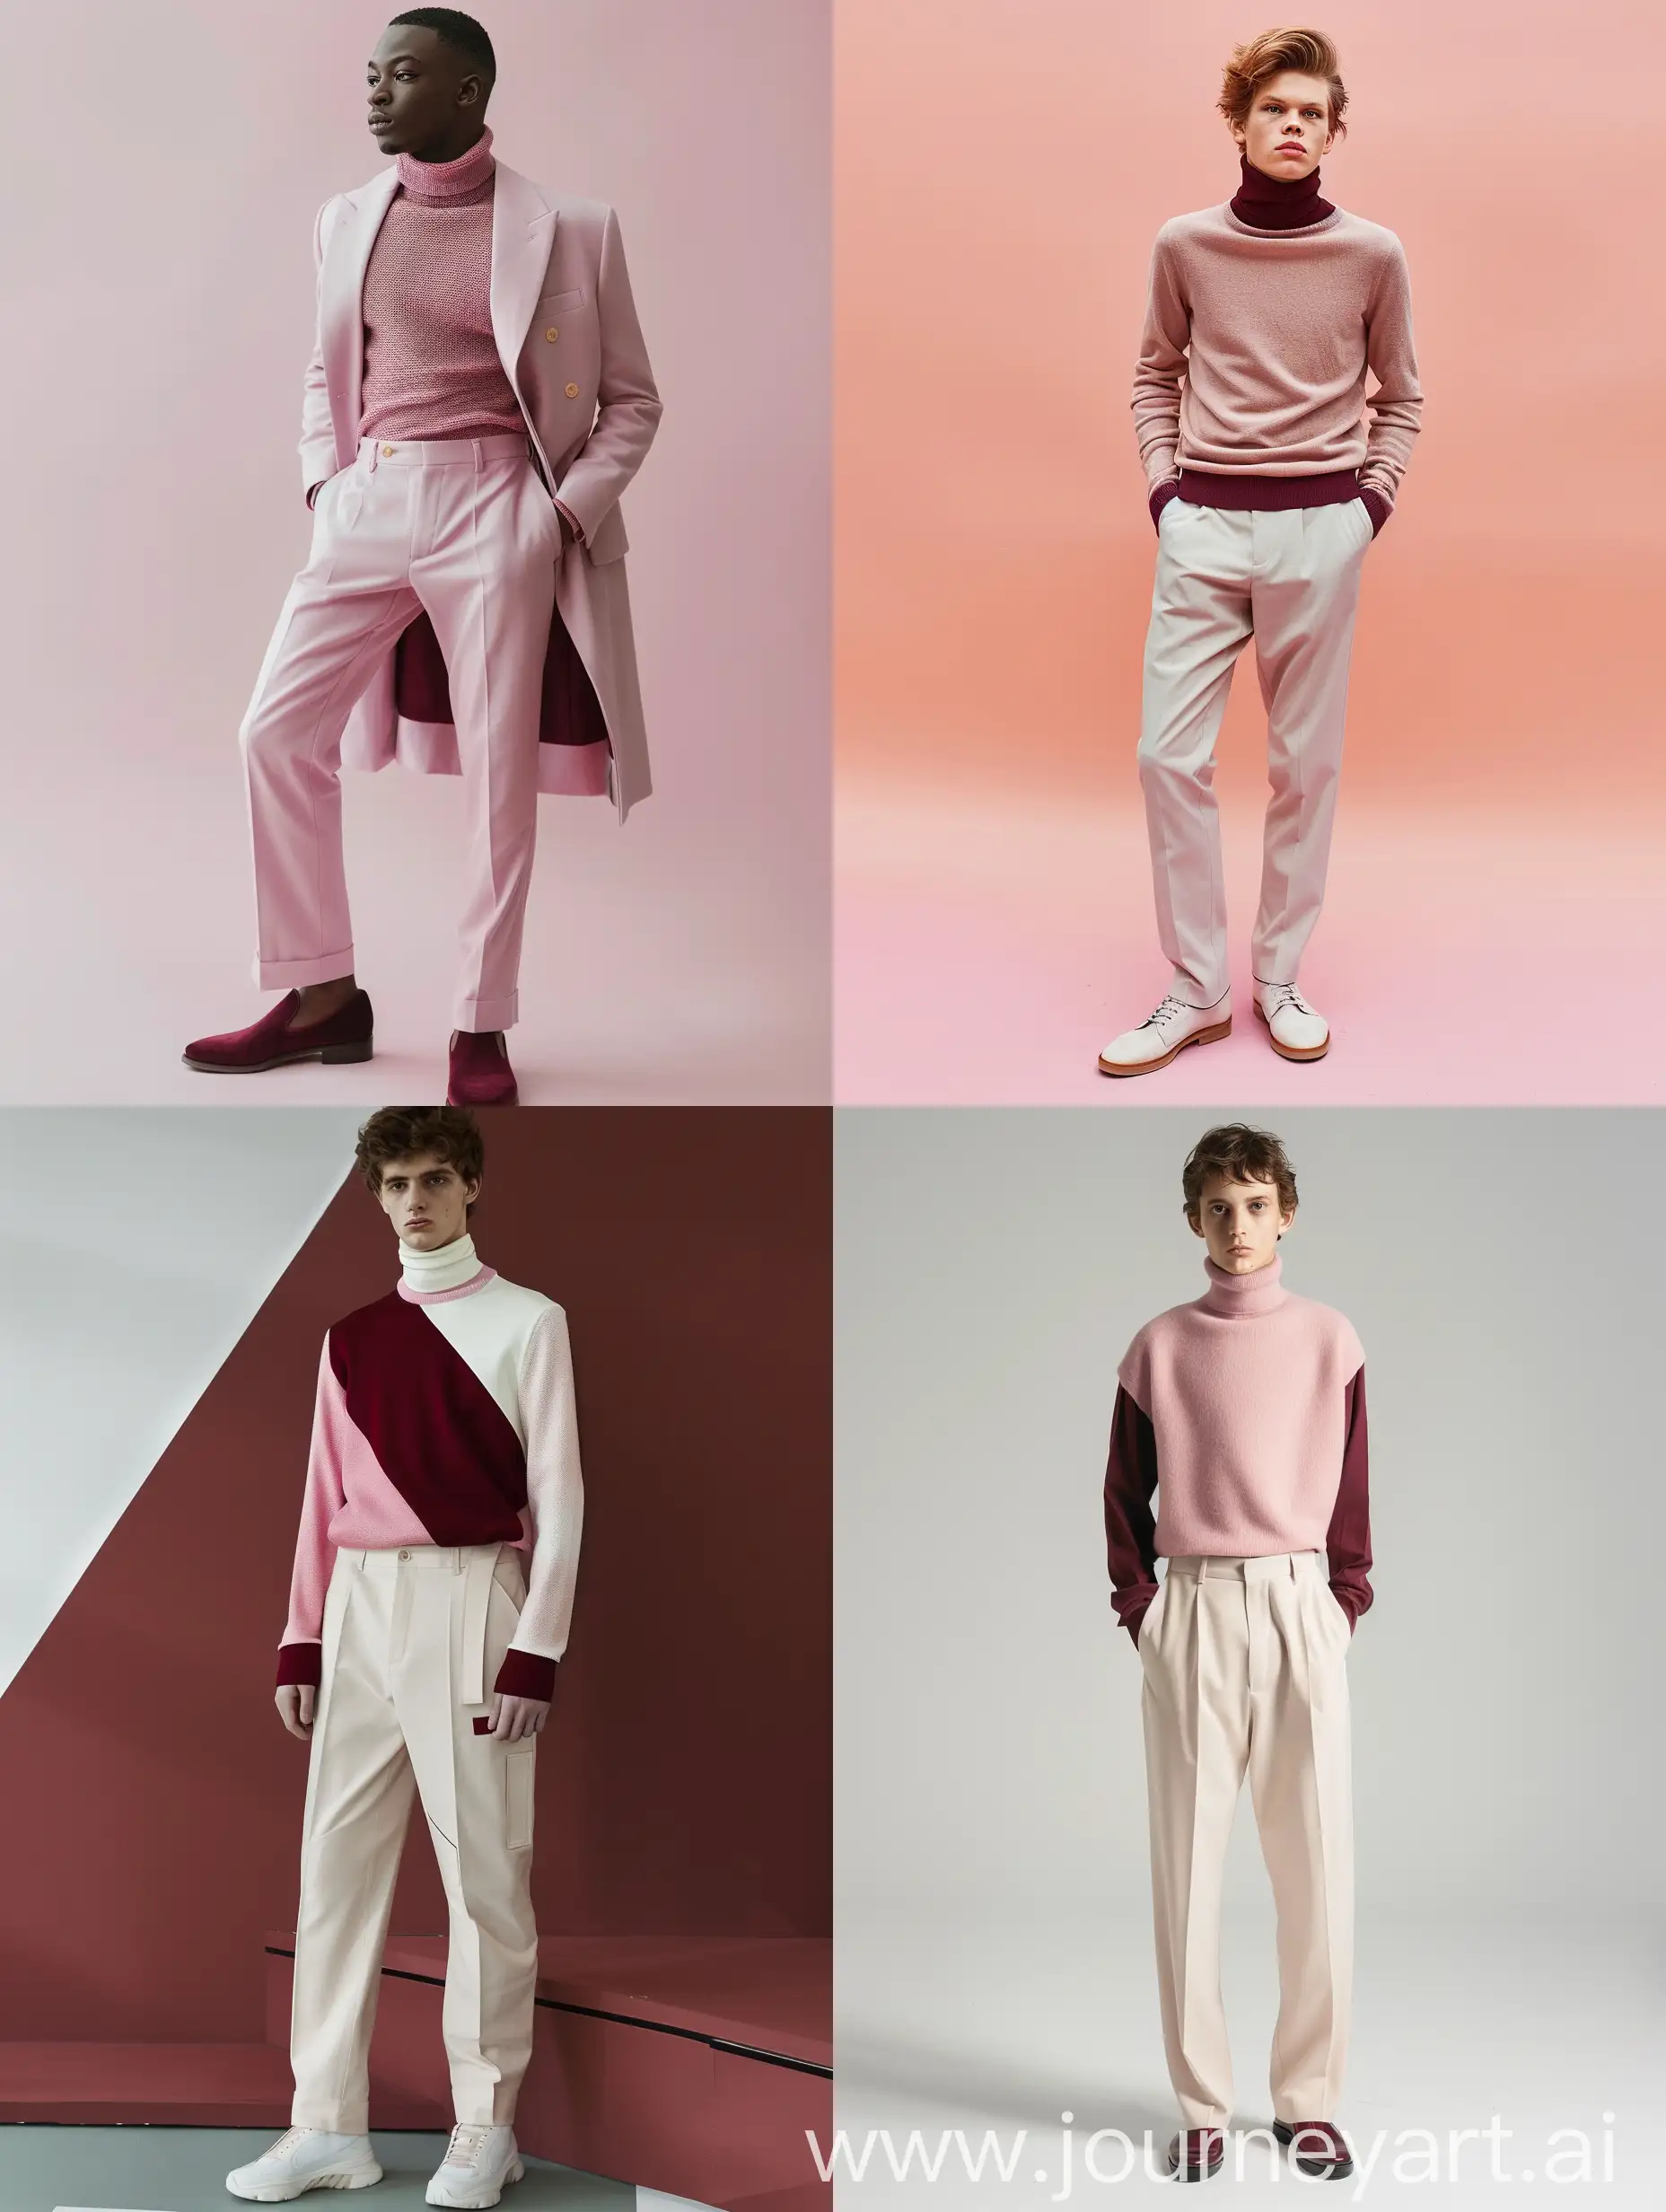 the image of clothes for a guy in full height, turtleneck, pastel colors, burgundy accent